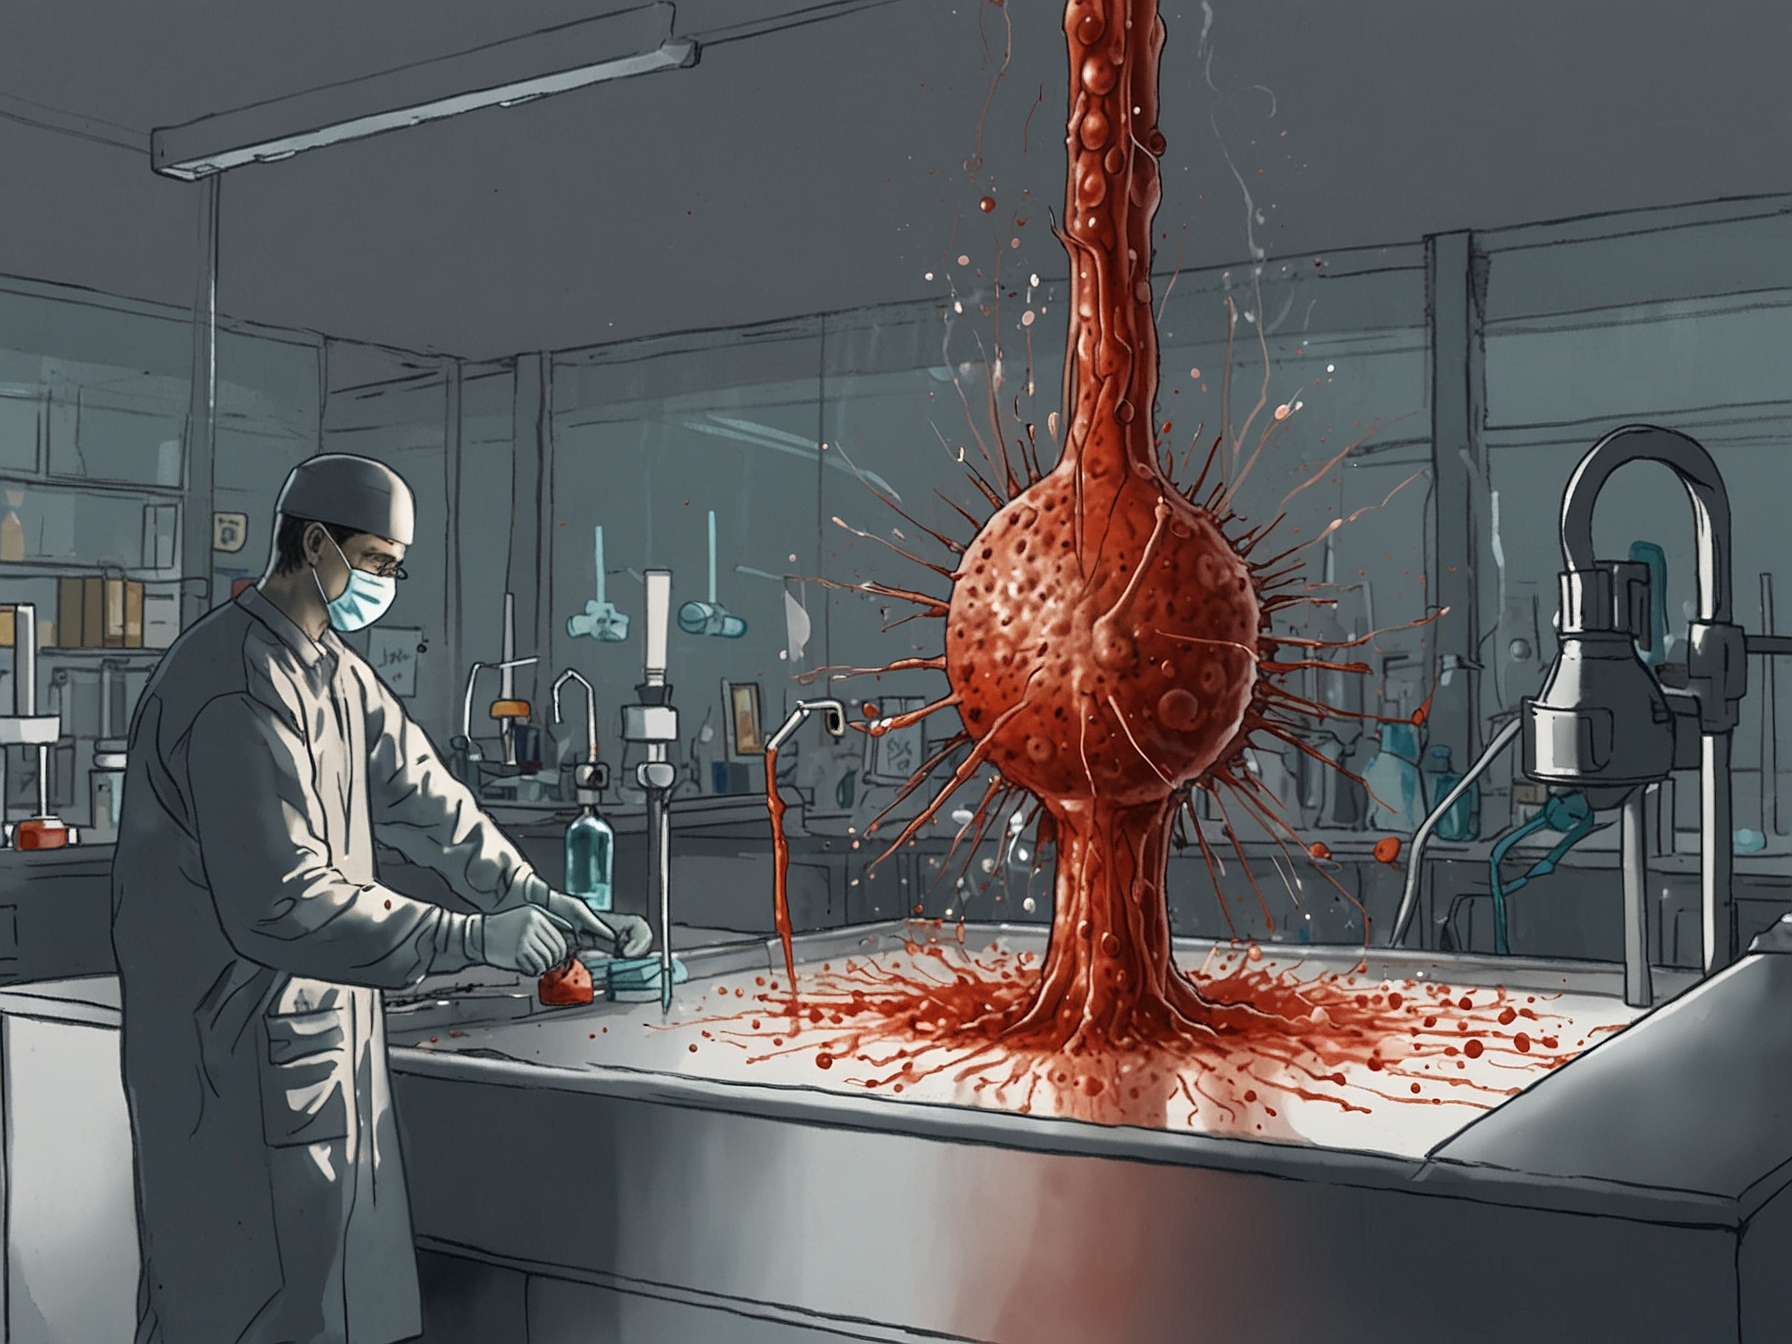 An illustration showing T-cells being extracted from a patient, genetically modified with nanowire technology in a lab setting, and reinfused into the patient's bloodstream.